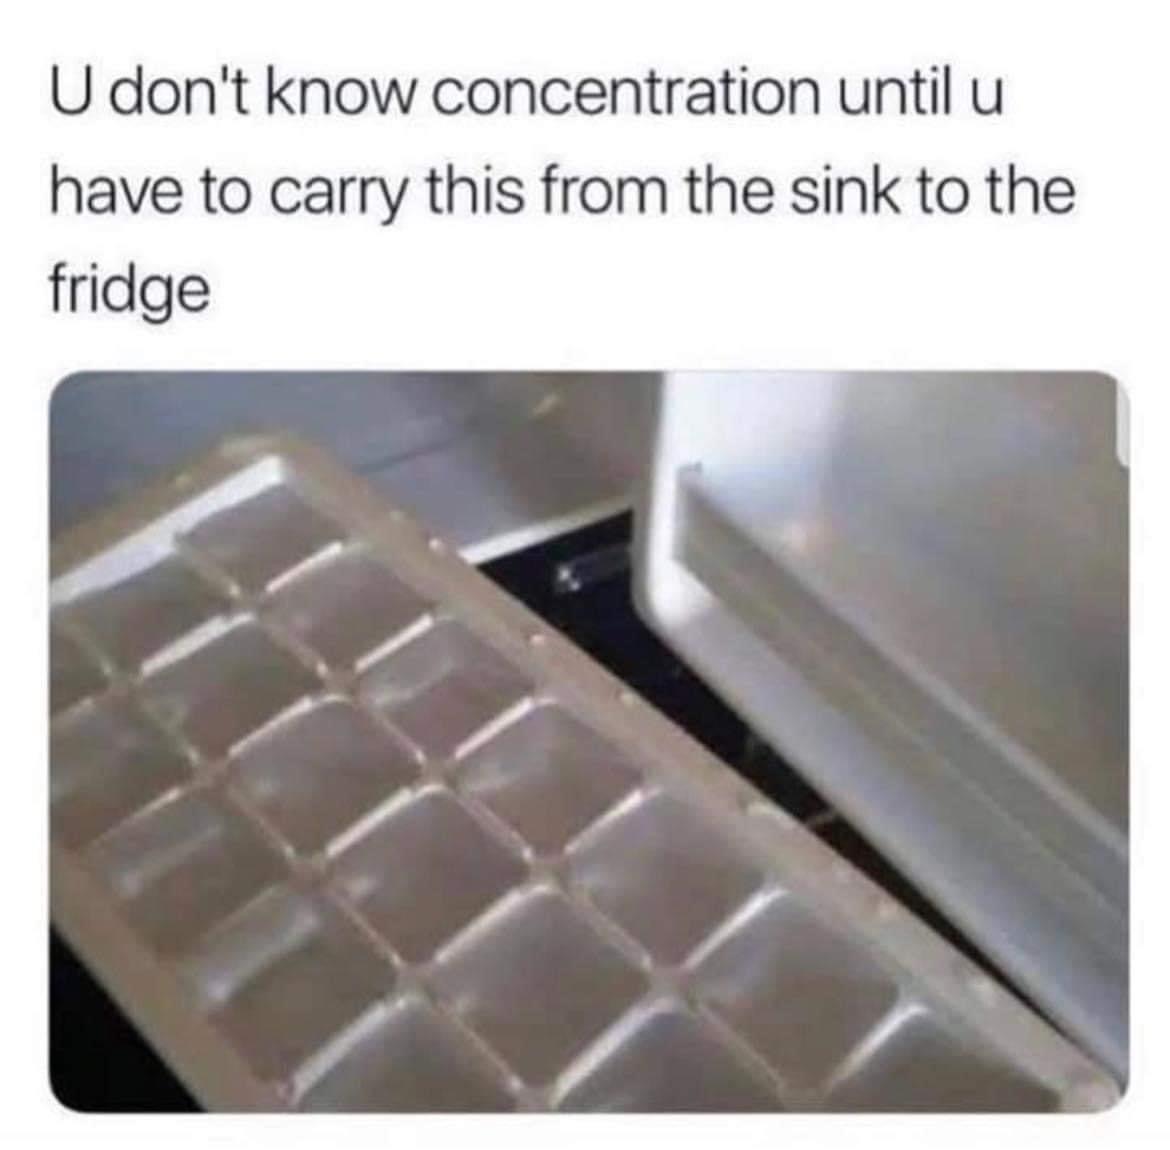 relatable memes - ice tray meme - U don't know concentration until u have to carry this from the sink to the fridge